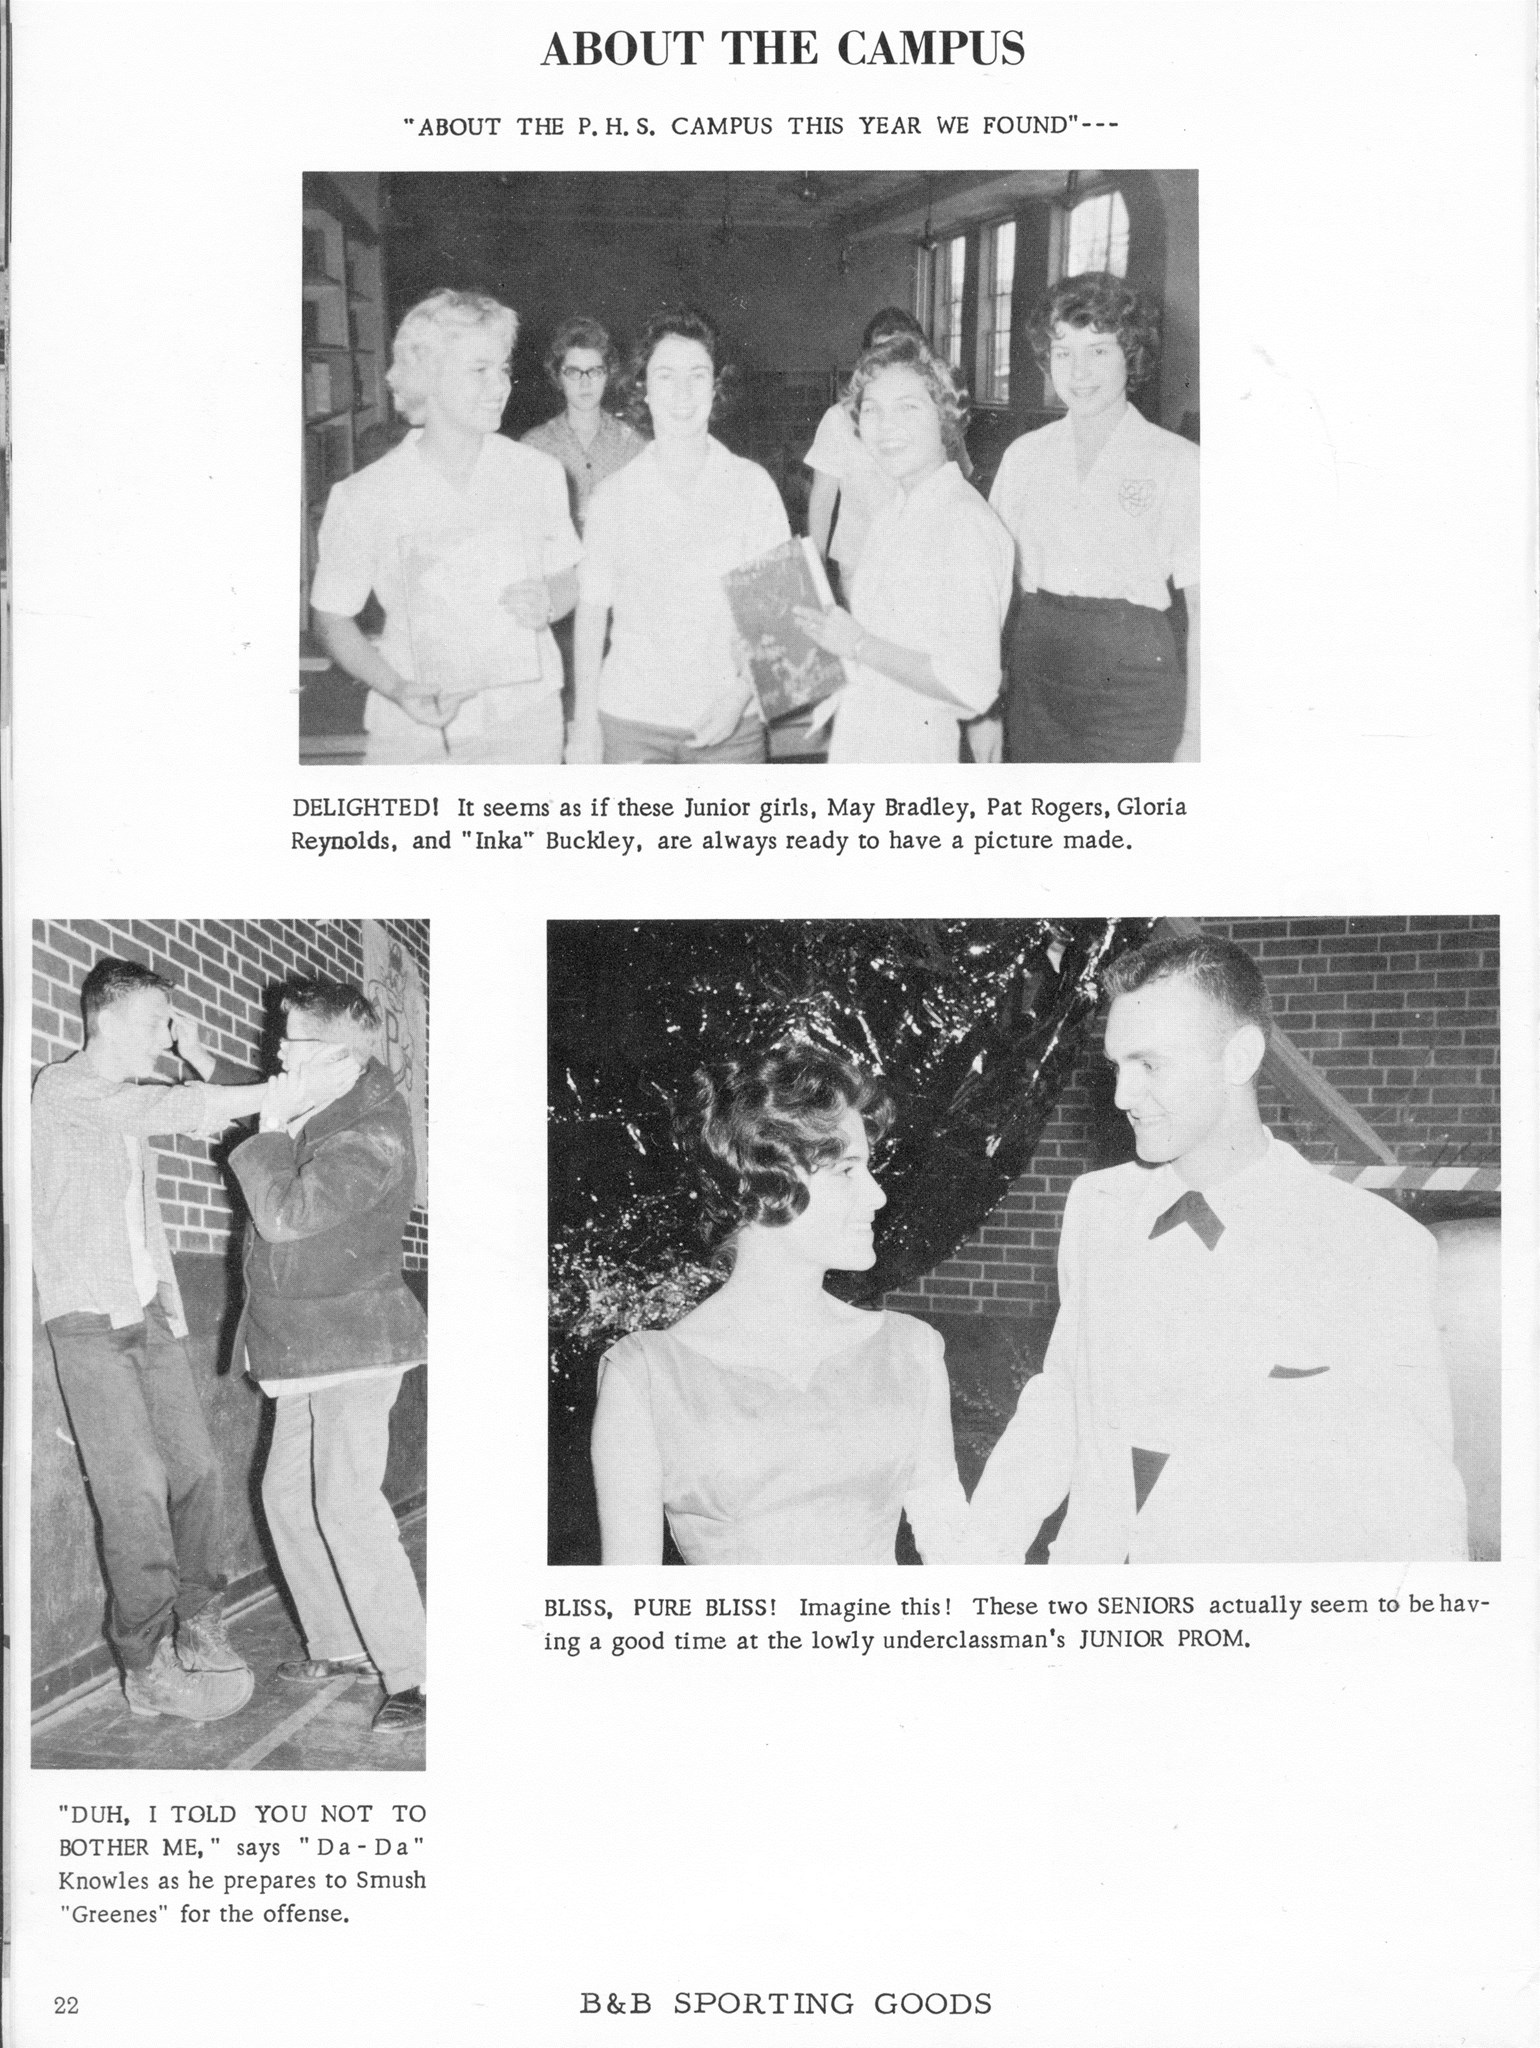 ../../../Images/Large/1961/Arclight-1961-pg0022.jpg